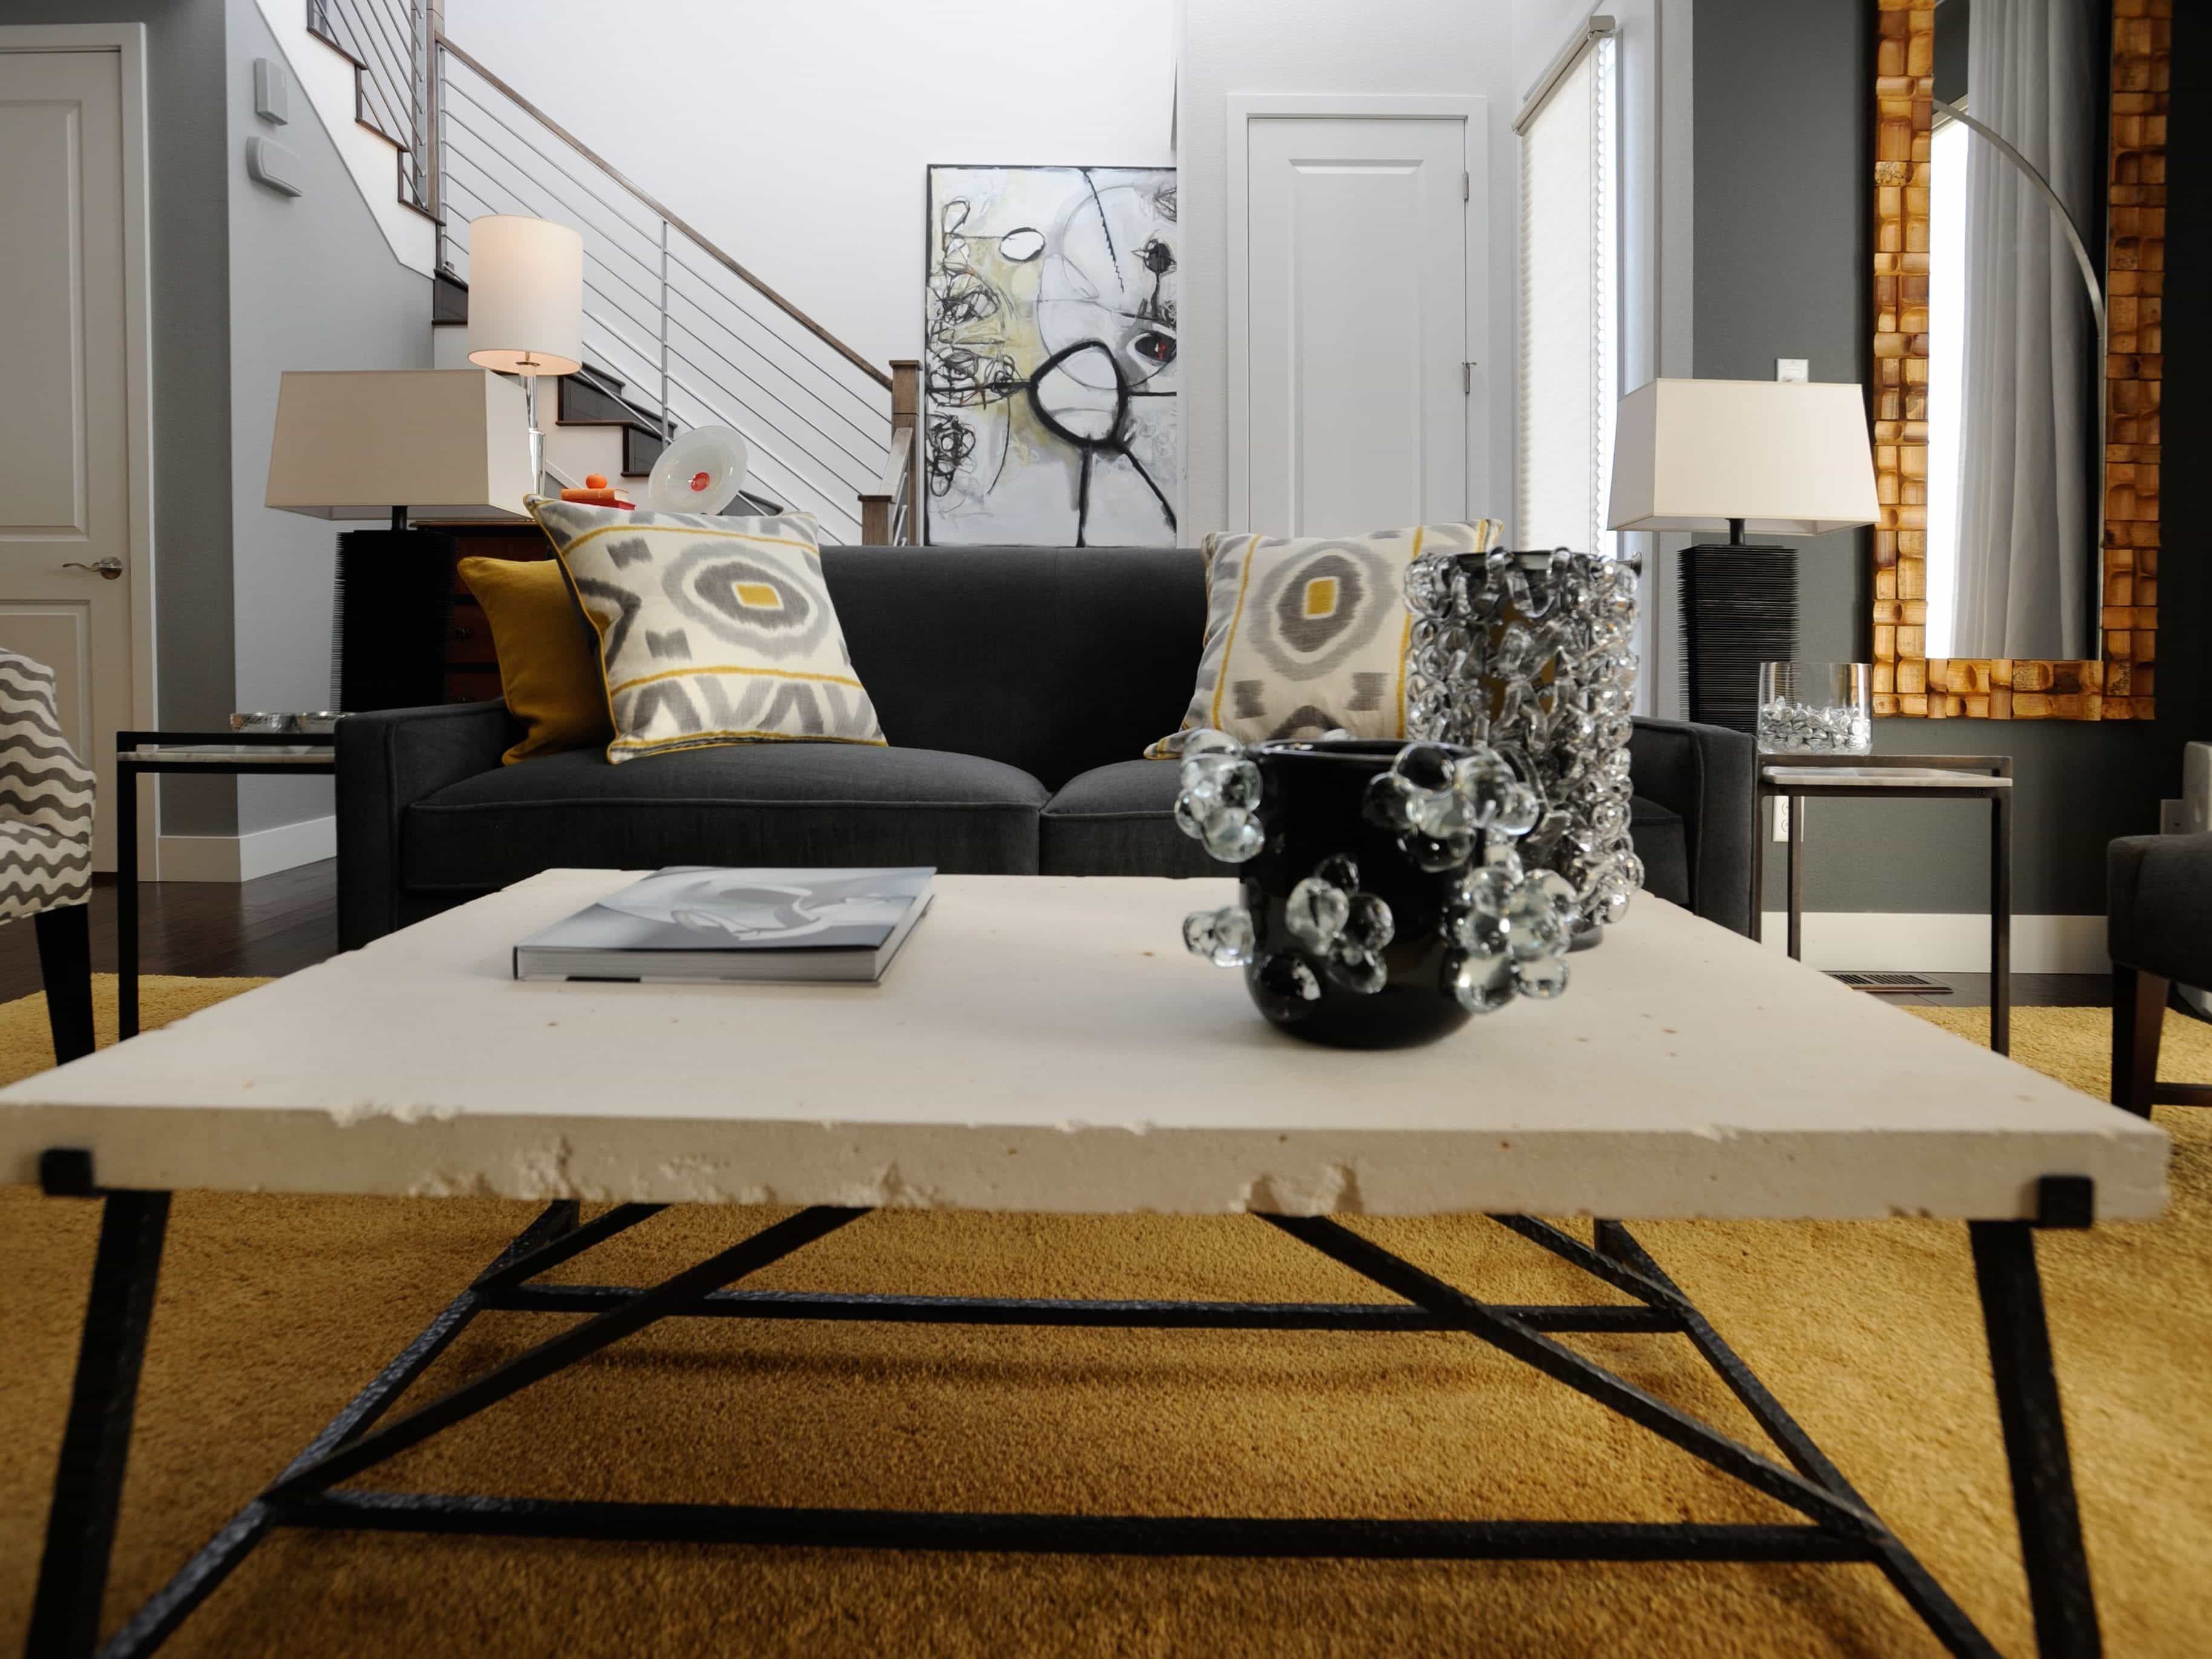 Industrial Coffee Table In Transitional Living Room (View 10 of 32)